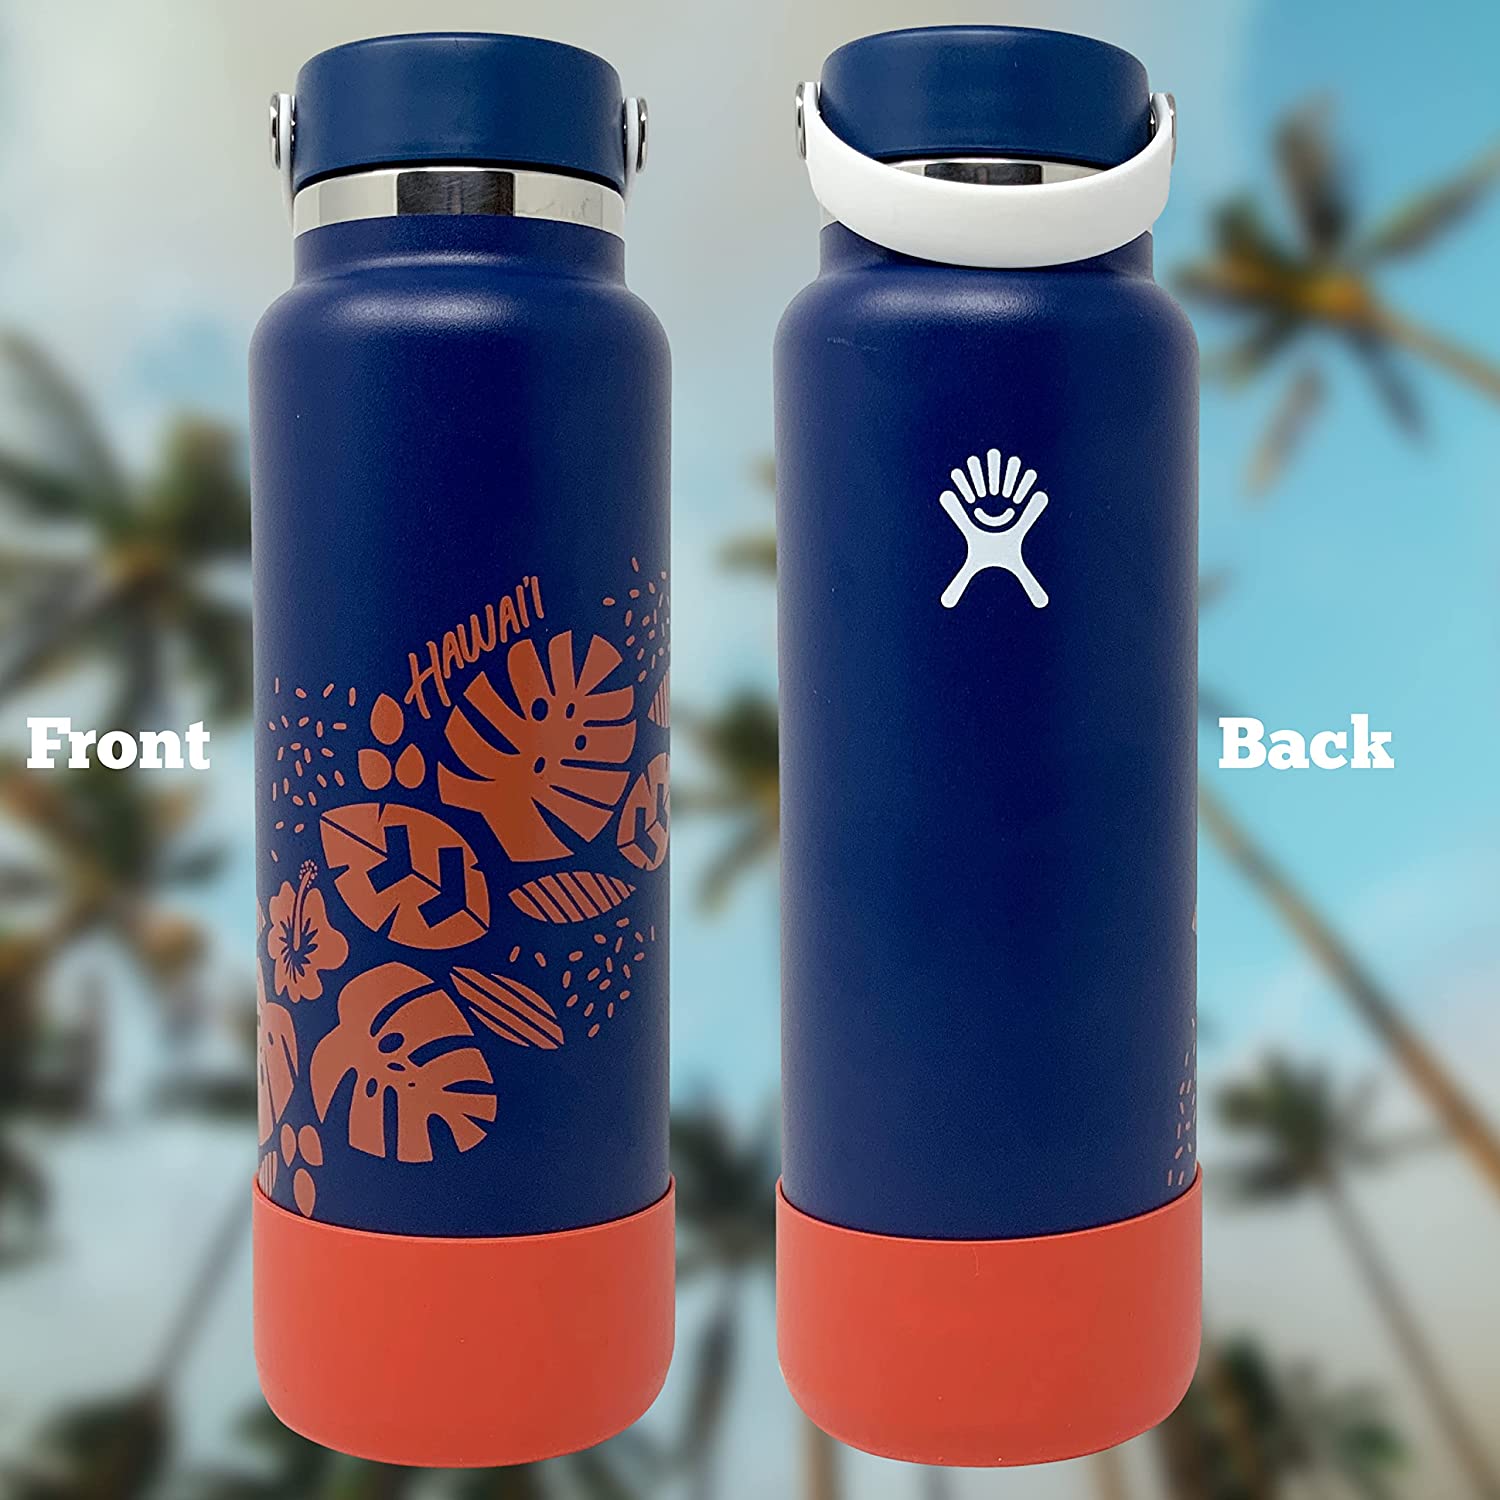 https://watertrackers.com/wp-content/uploads/2022/01/Hydroflask-Hawaii-Limited-Edition-Cobalt-front-and-back.jpg